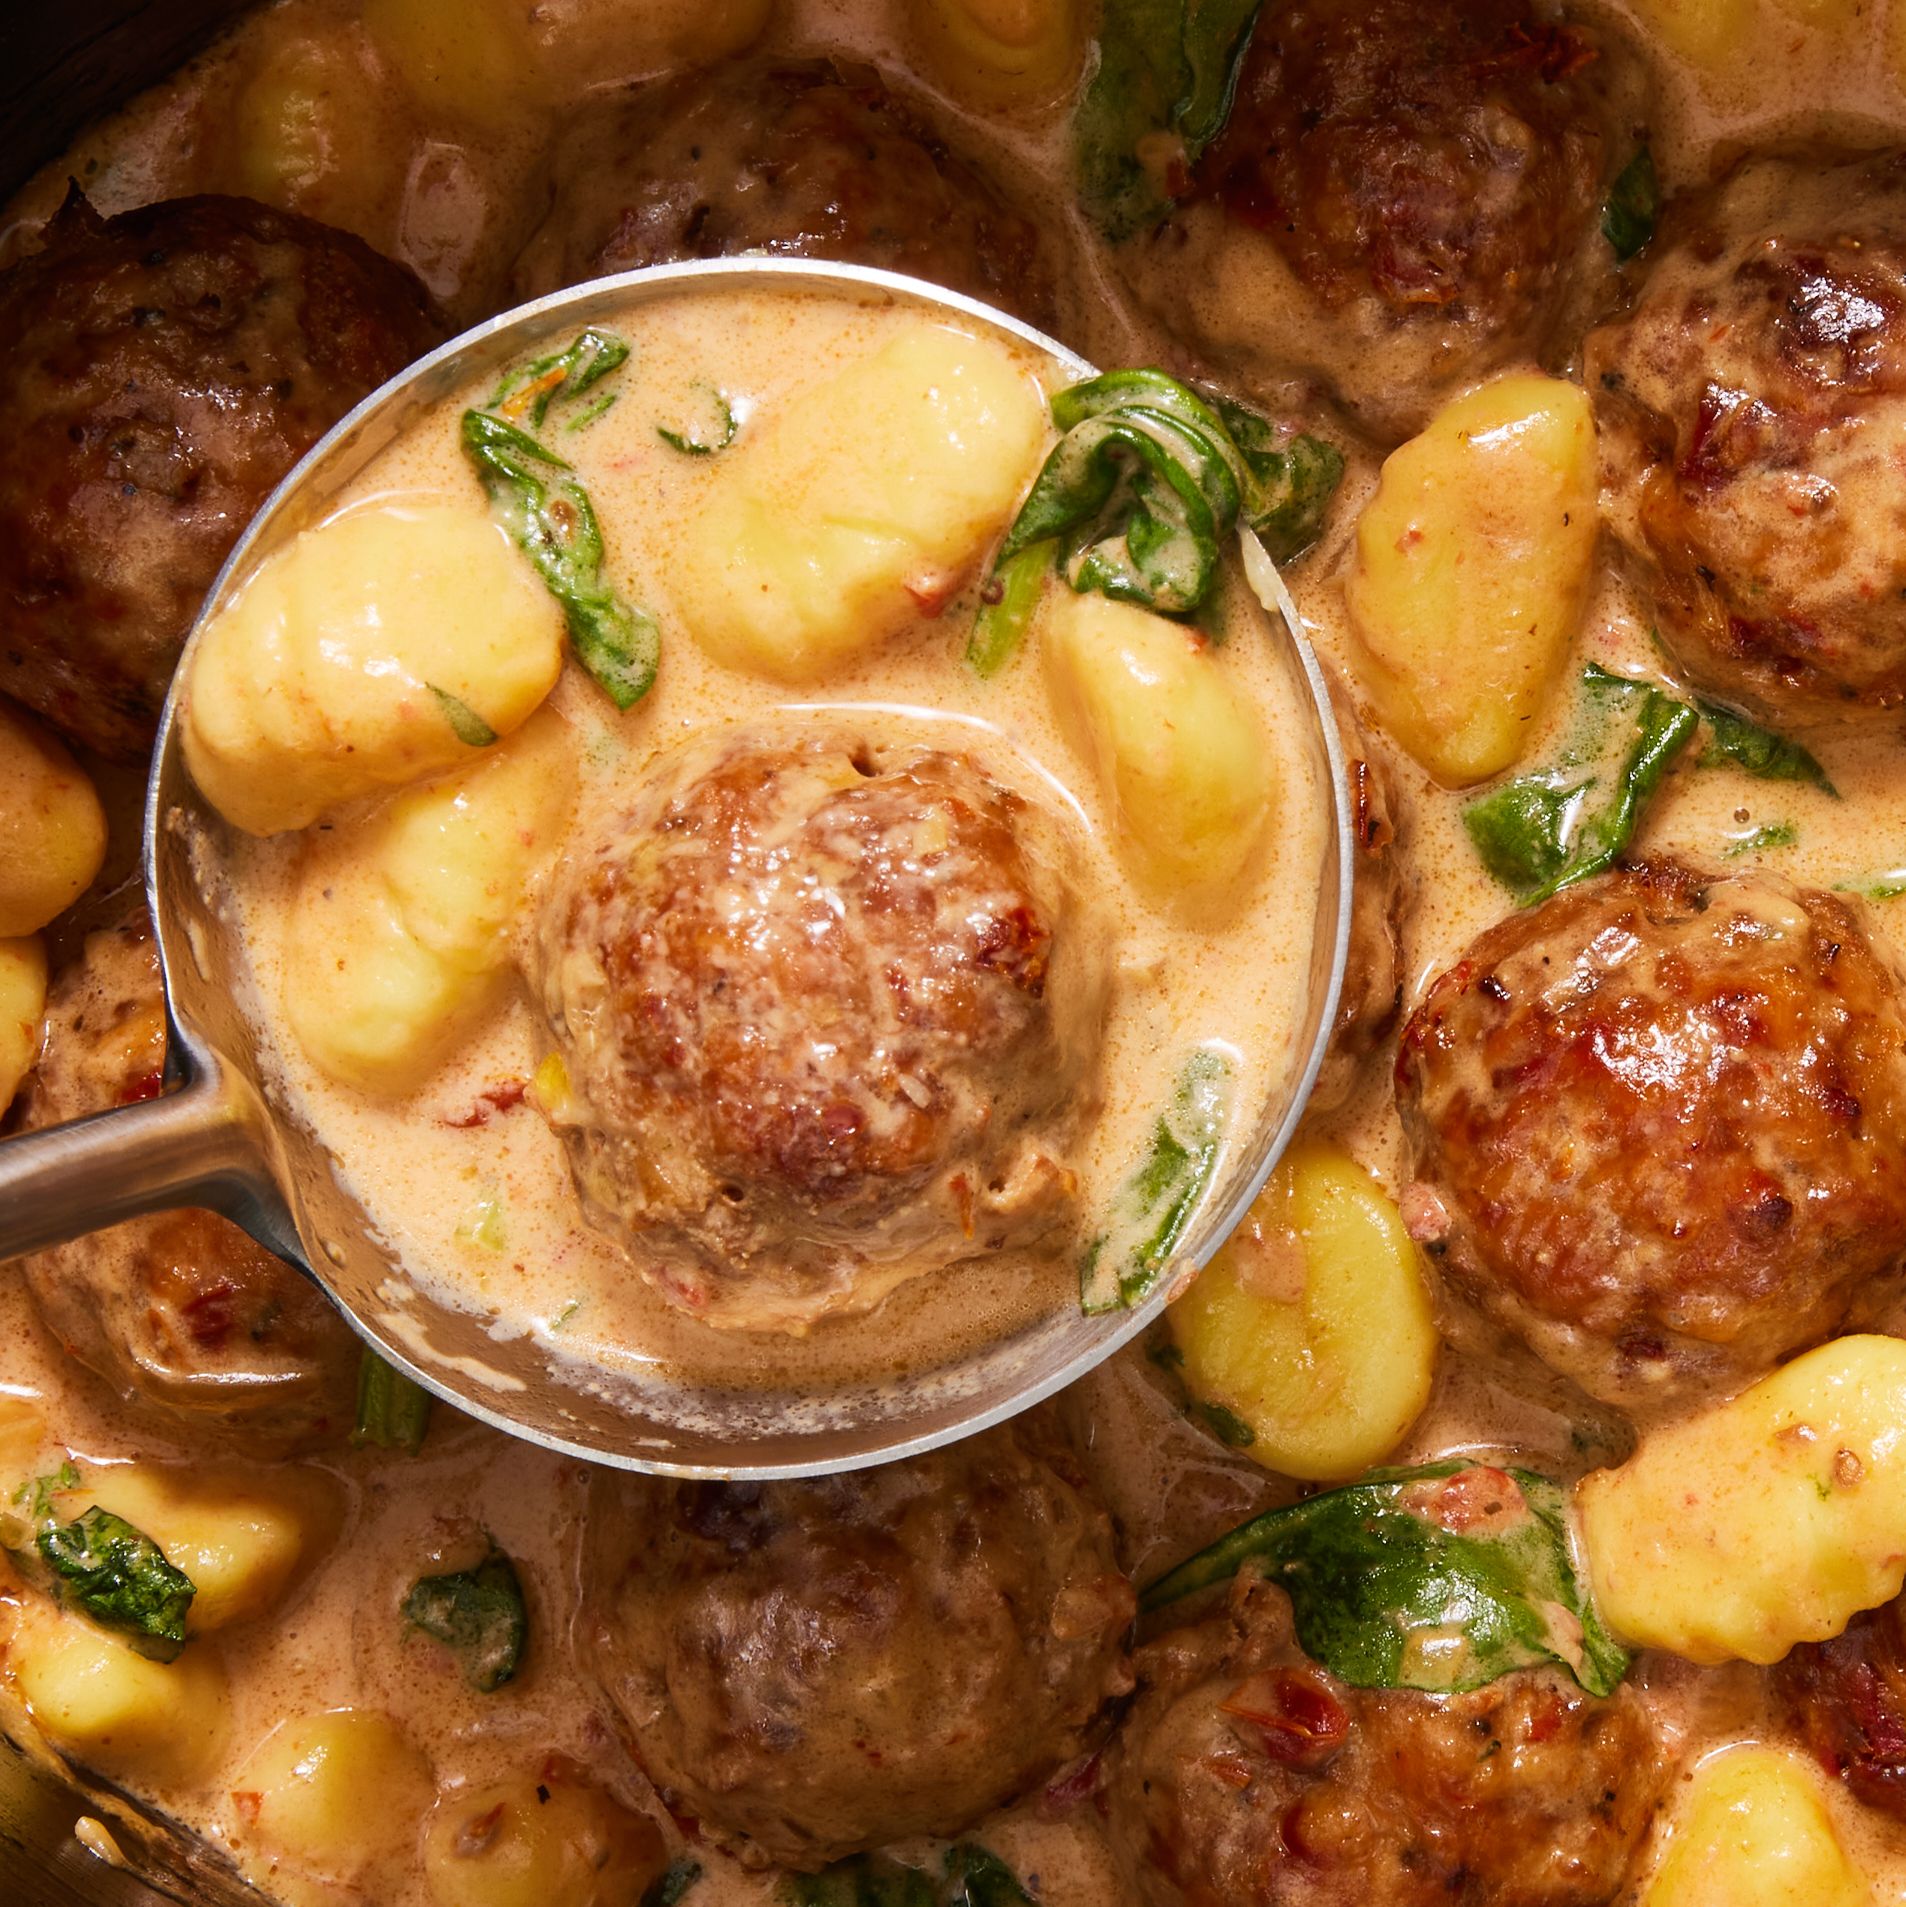 https://hips.hearstapps.com/hmg-prod/images/slow-cooker-tuscan-chicken-meatballs-with-gnocchi-lead-64665b26a9f0d.jpg